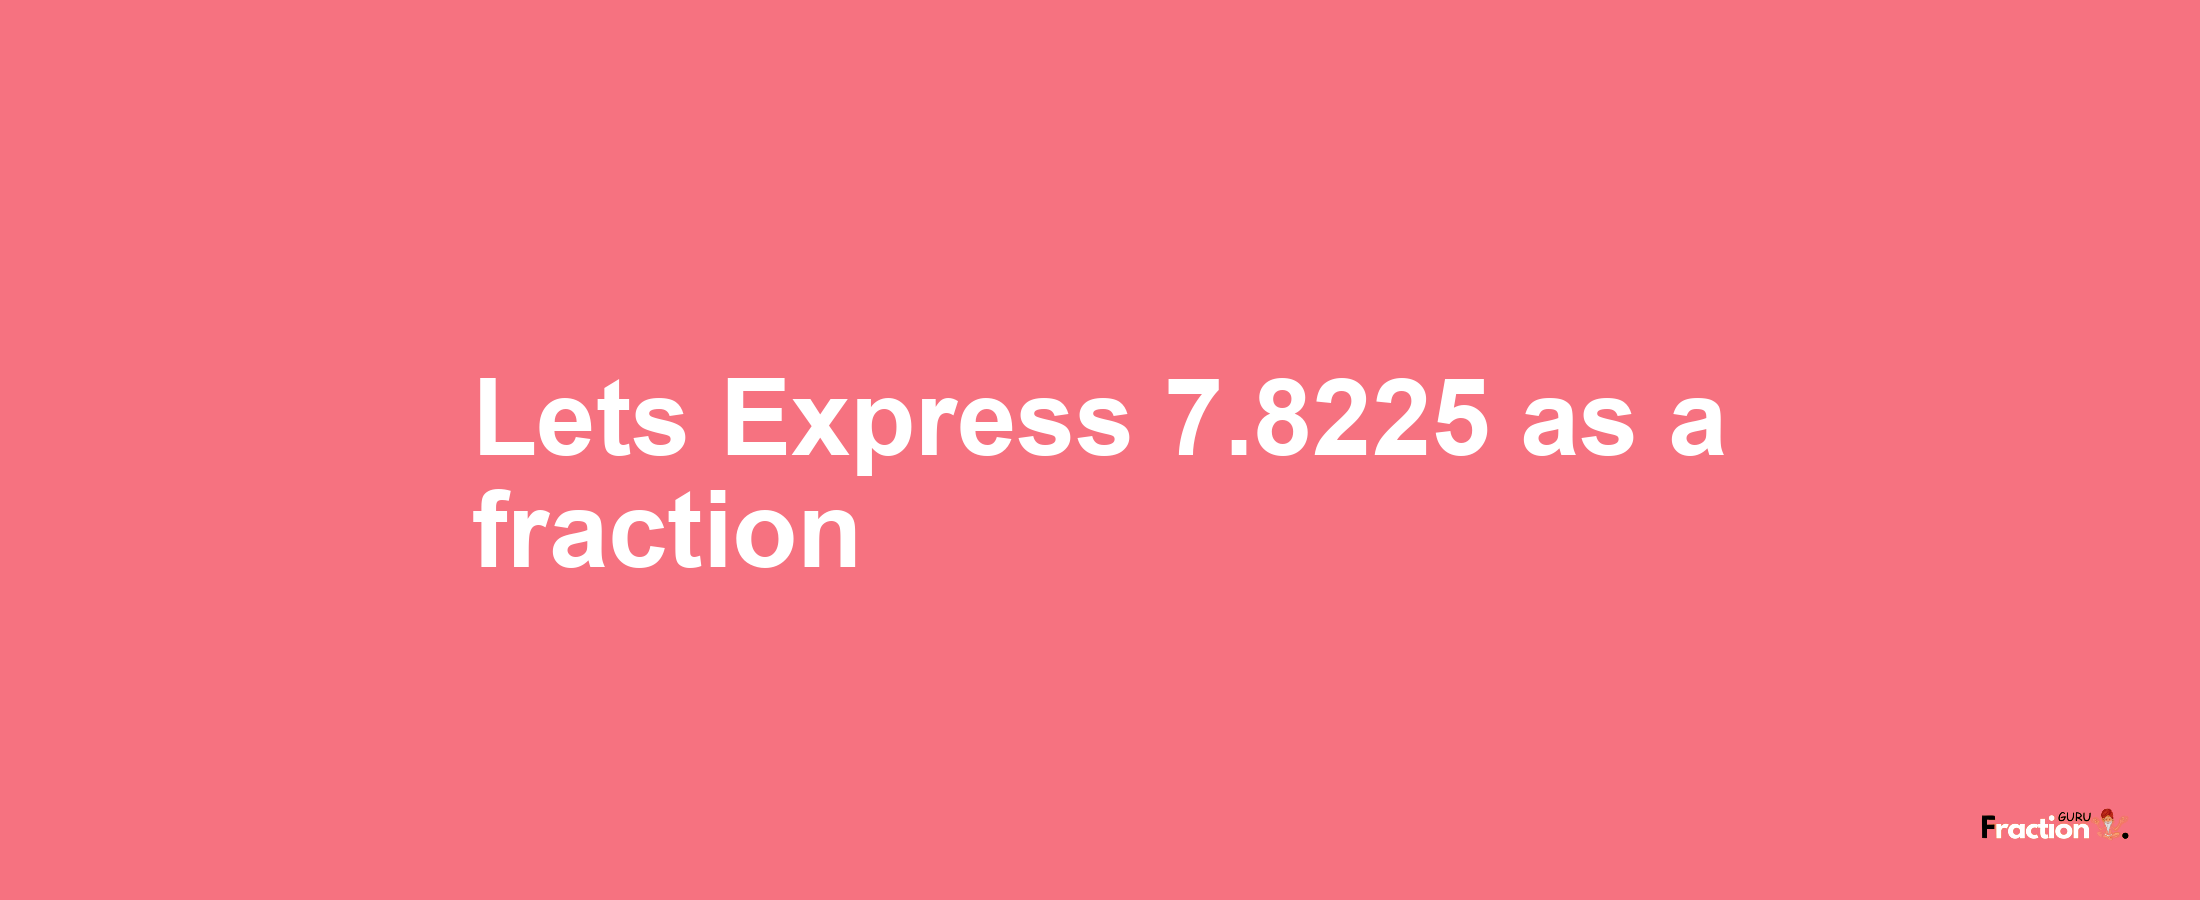 Lets Express 7.8225 as afraction